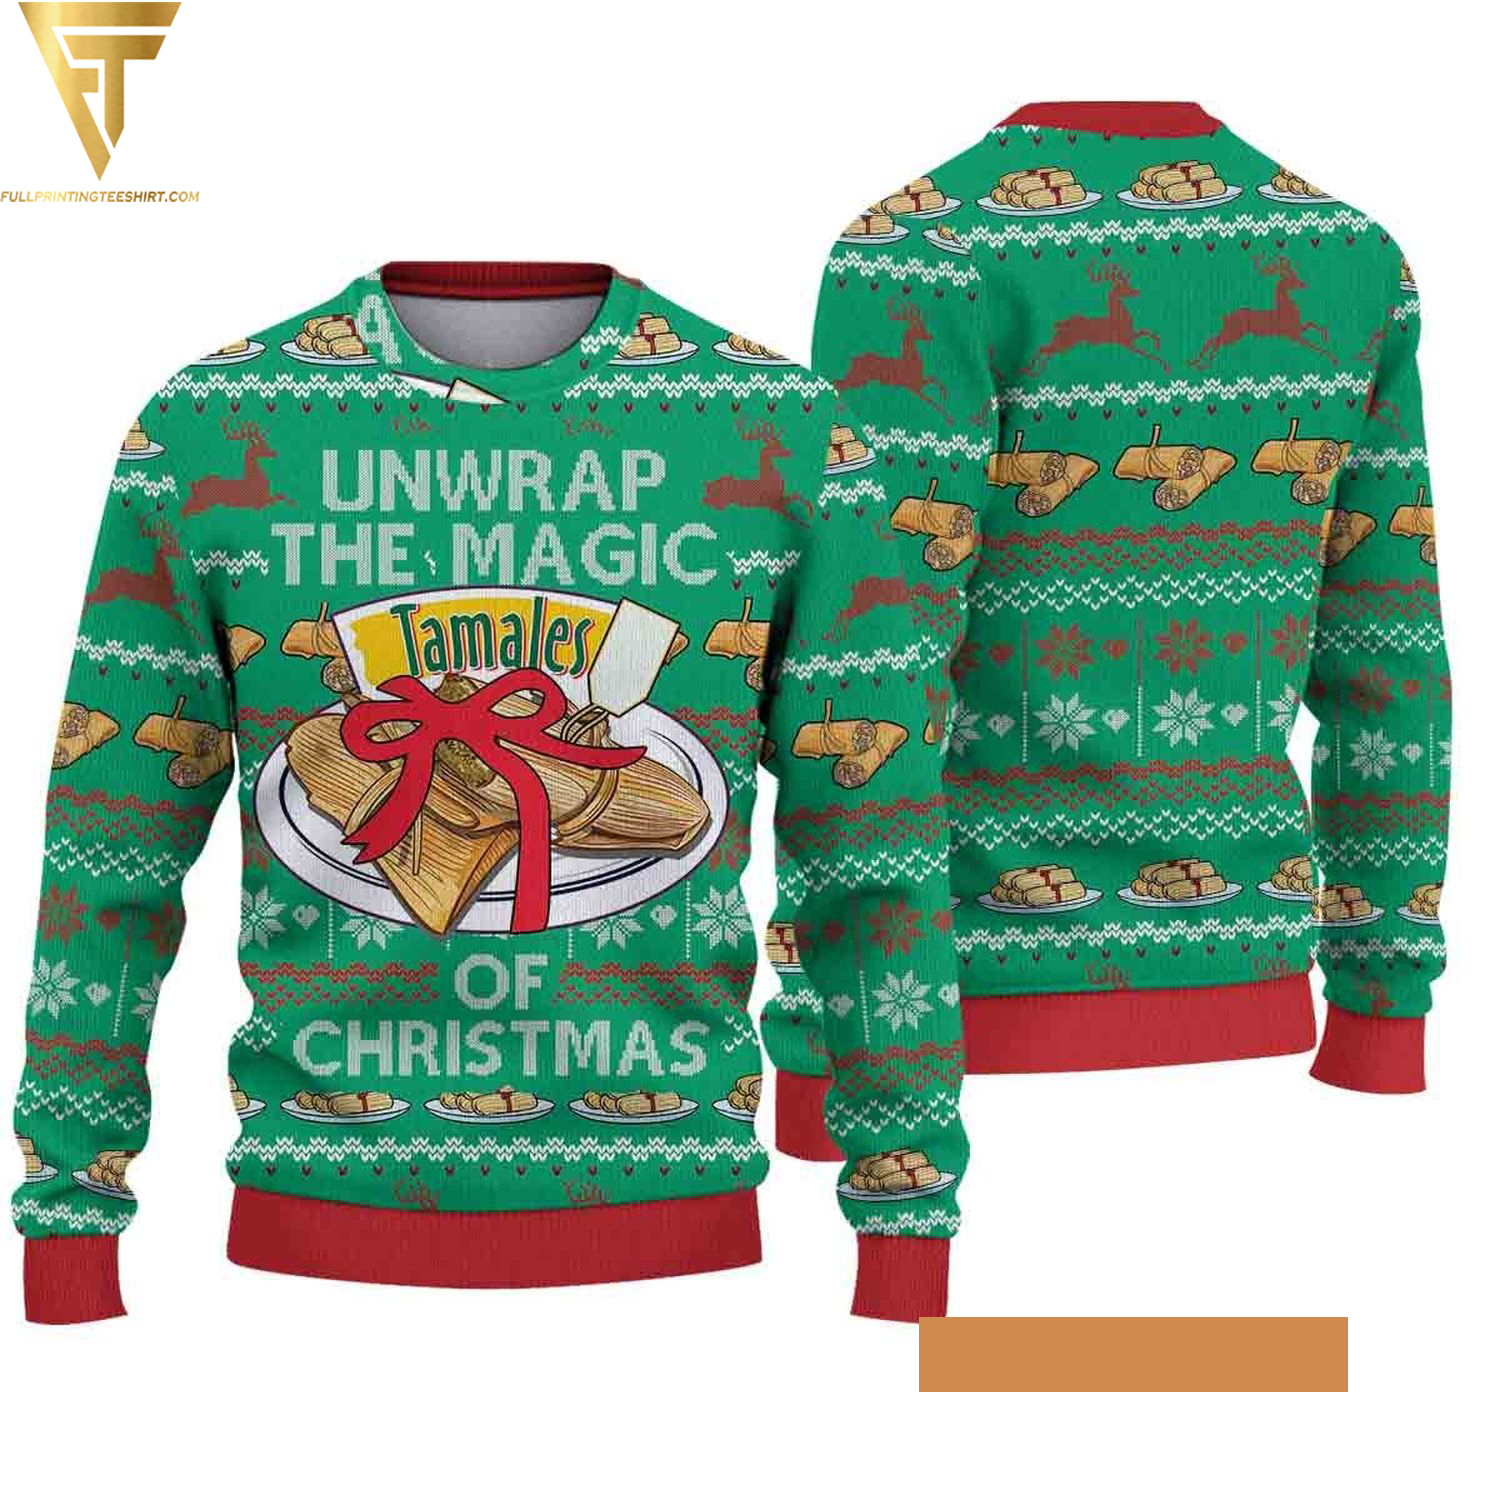 Unwrap the magic of christmas ugly christmas sweater